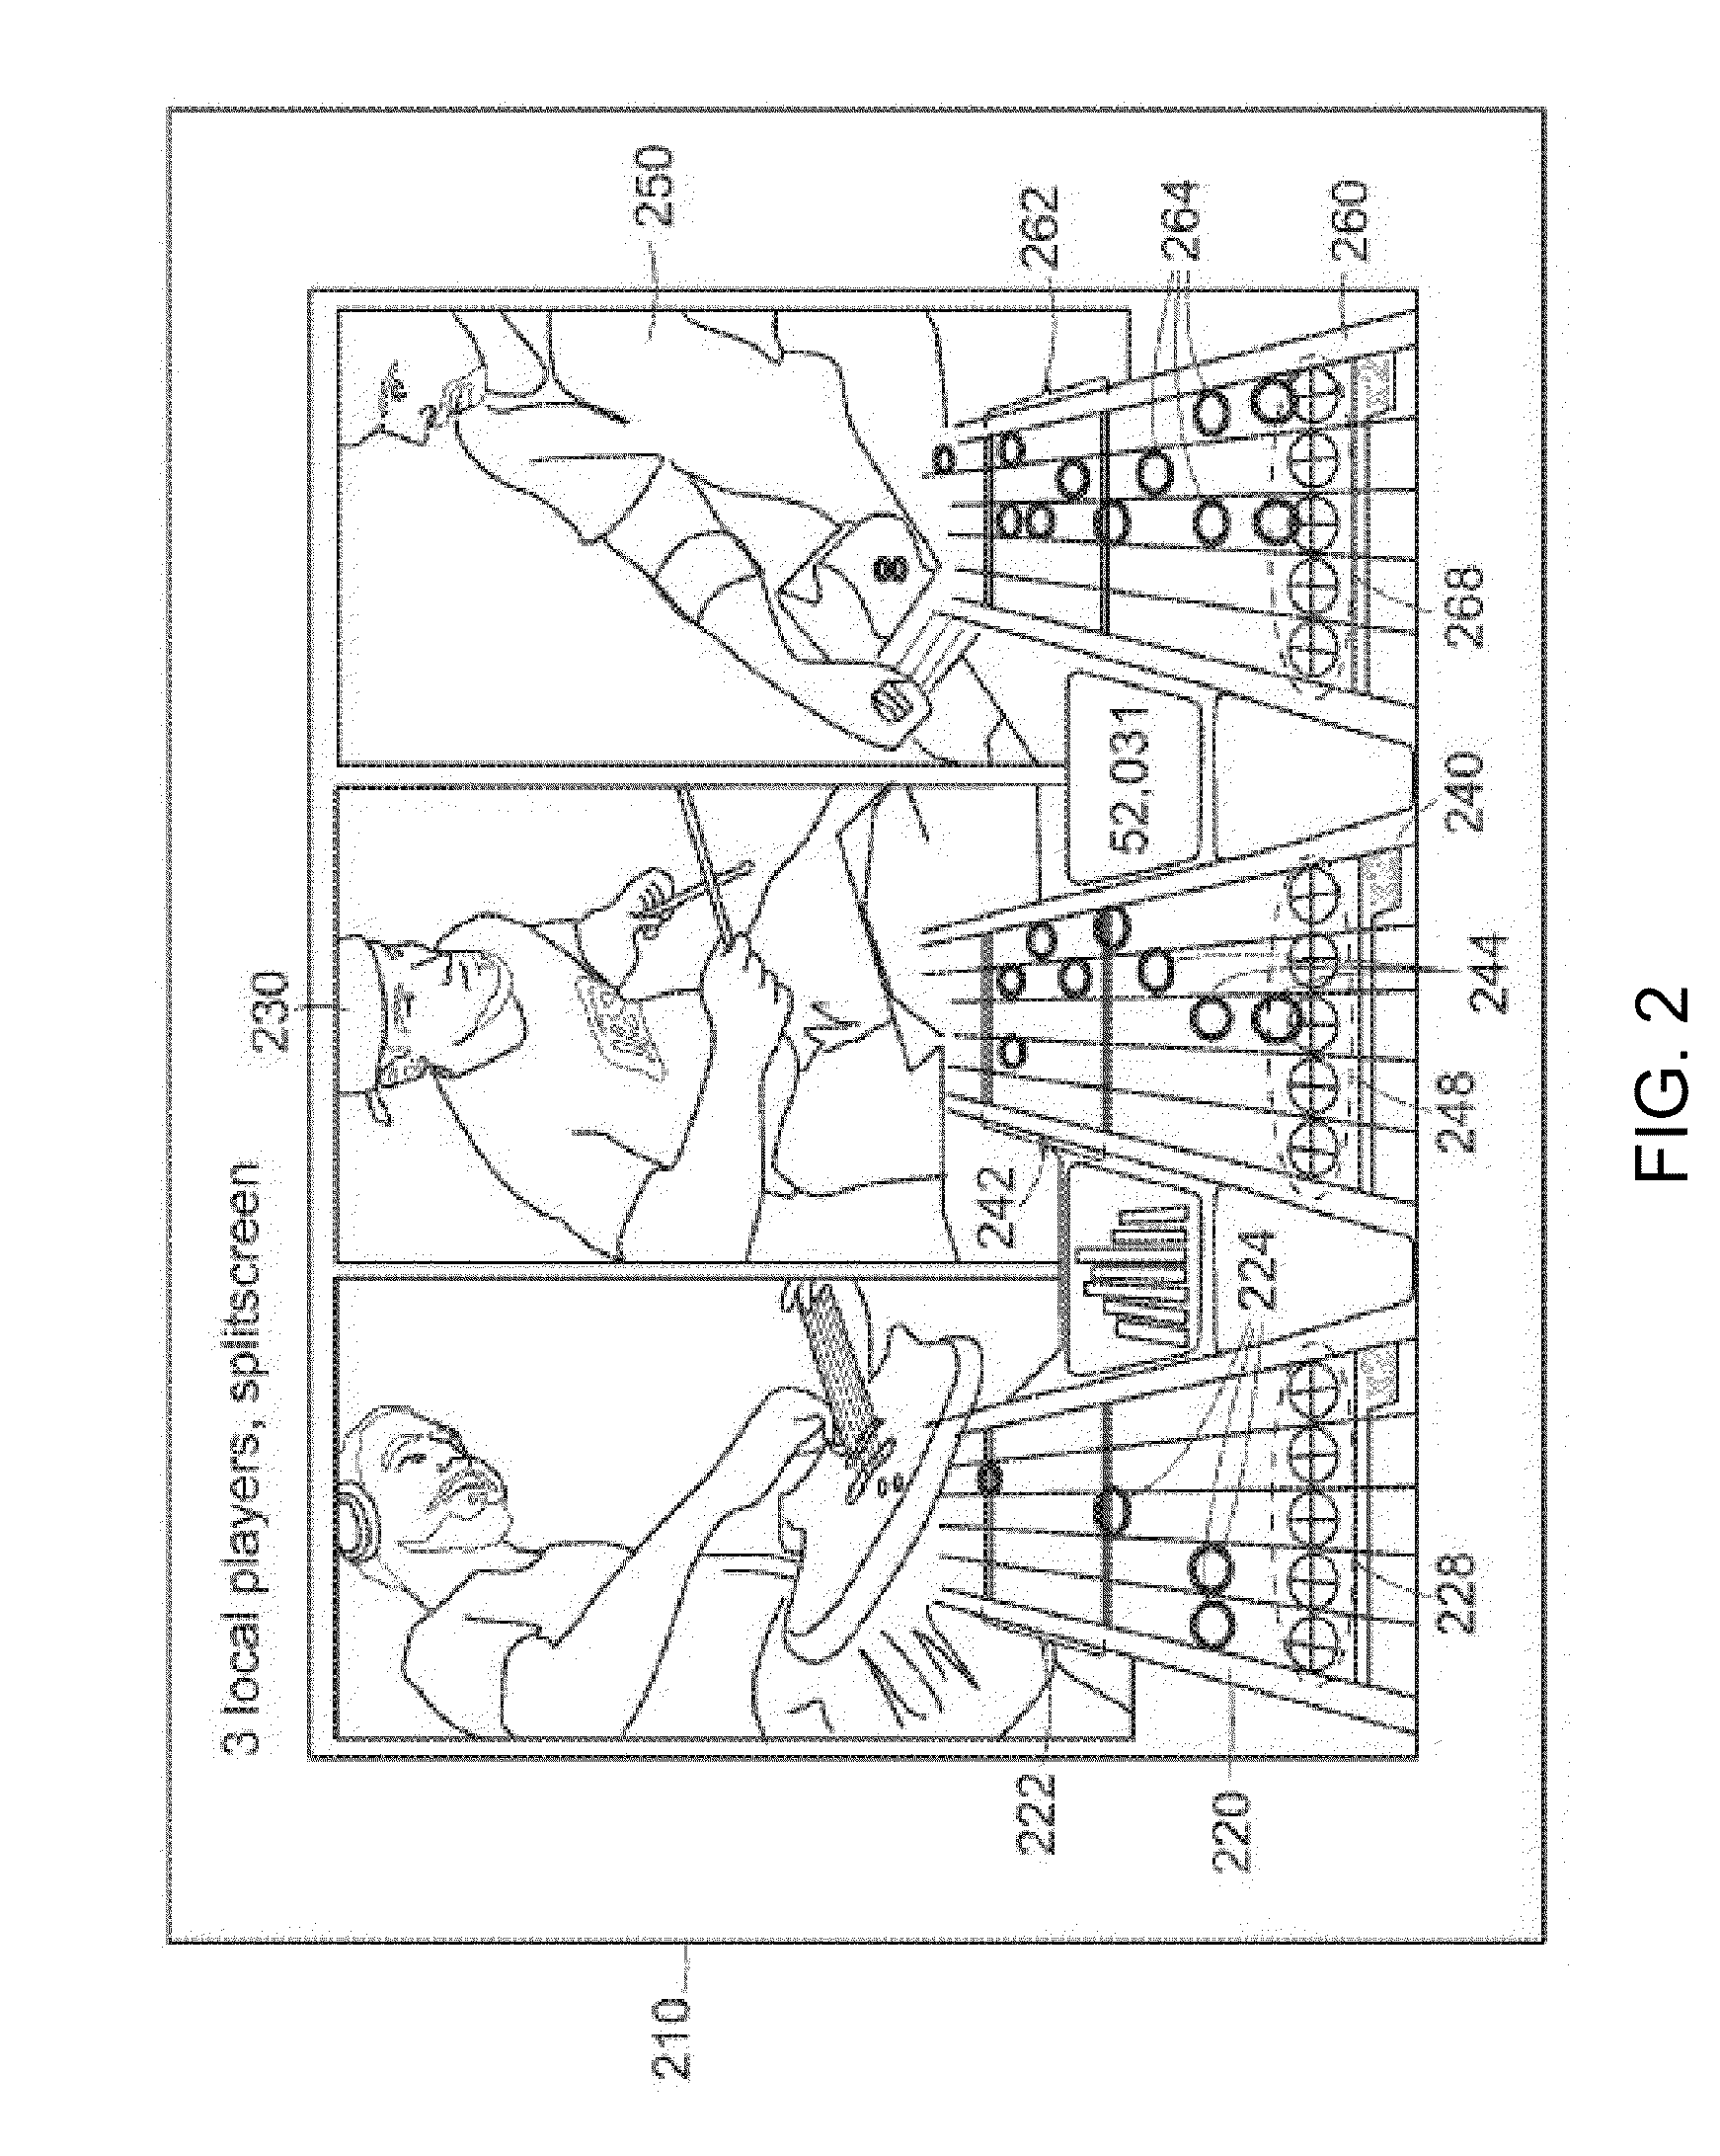 Method and apparatus for providing a simulated band experience including online interaction